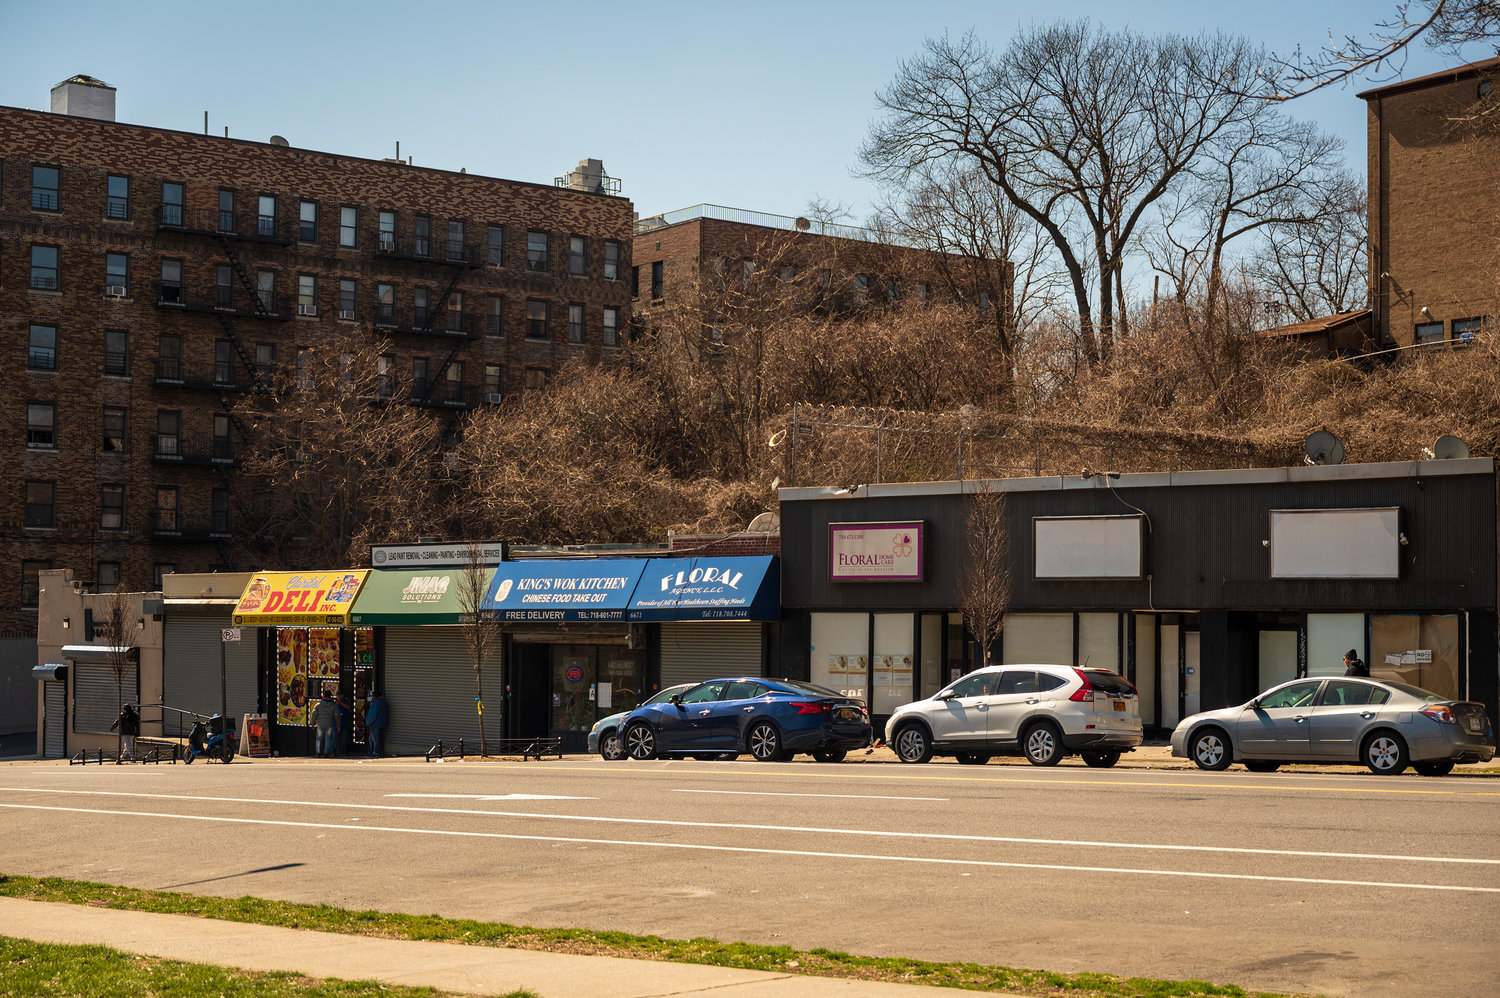 All but two businesses at 6661 Broadway have shuttered ahead of the building’s demolition to make way for a new proposed homeless shelter built and operated by Westhab Inc.